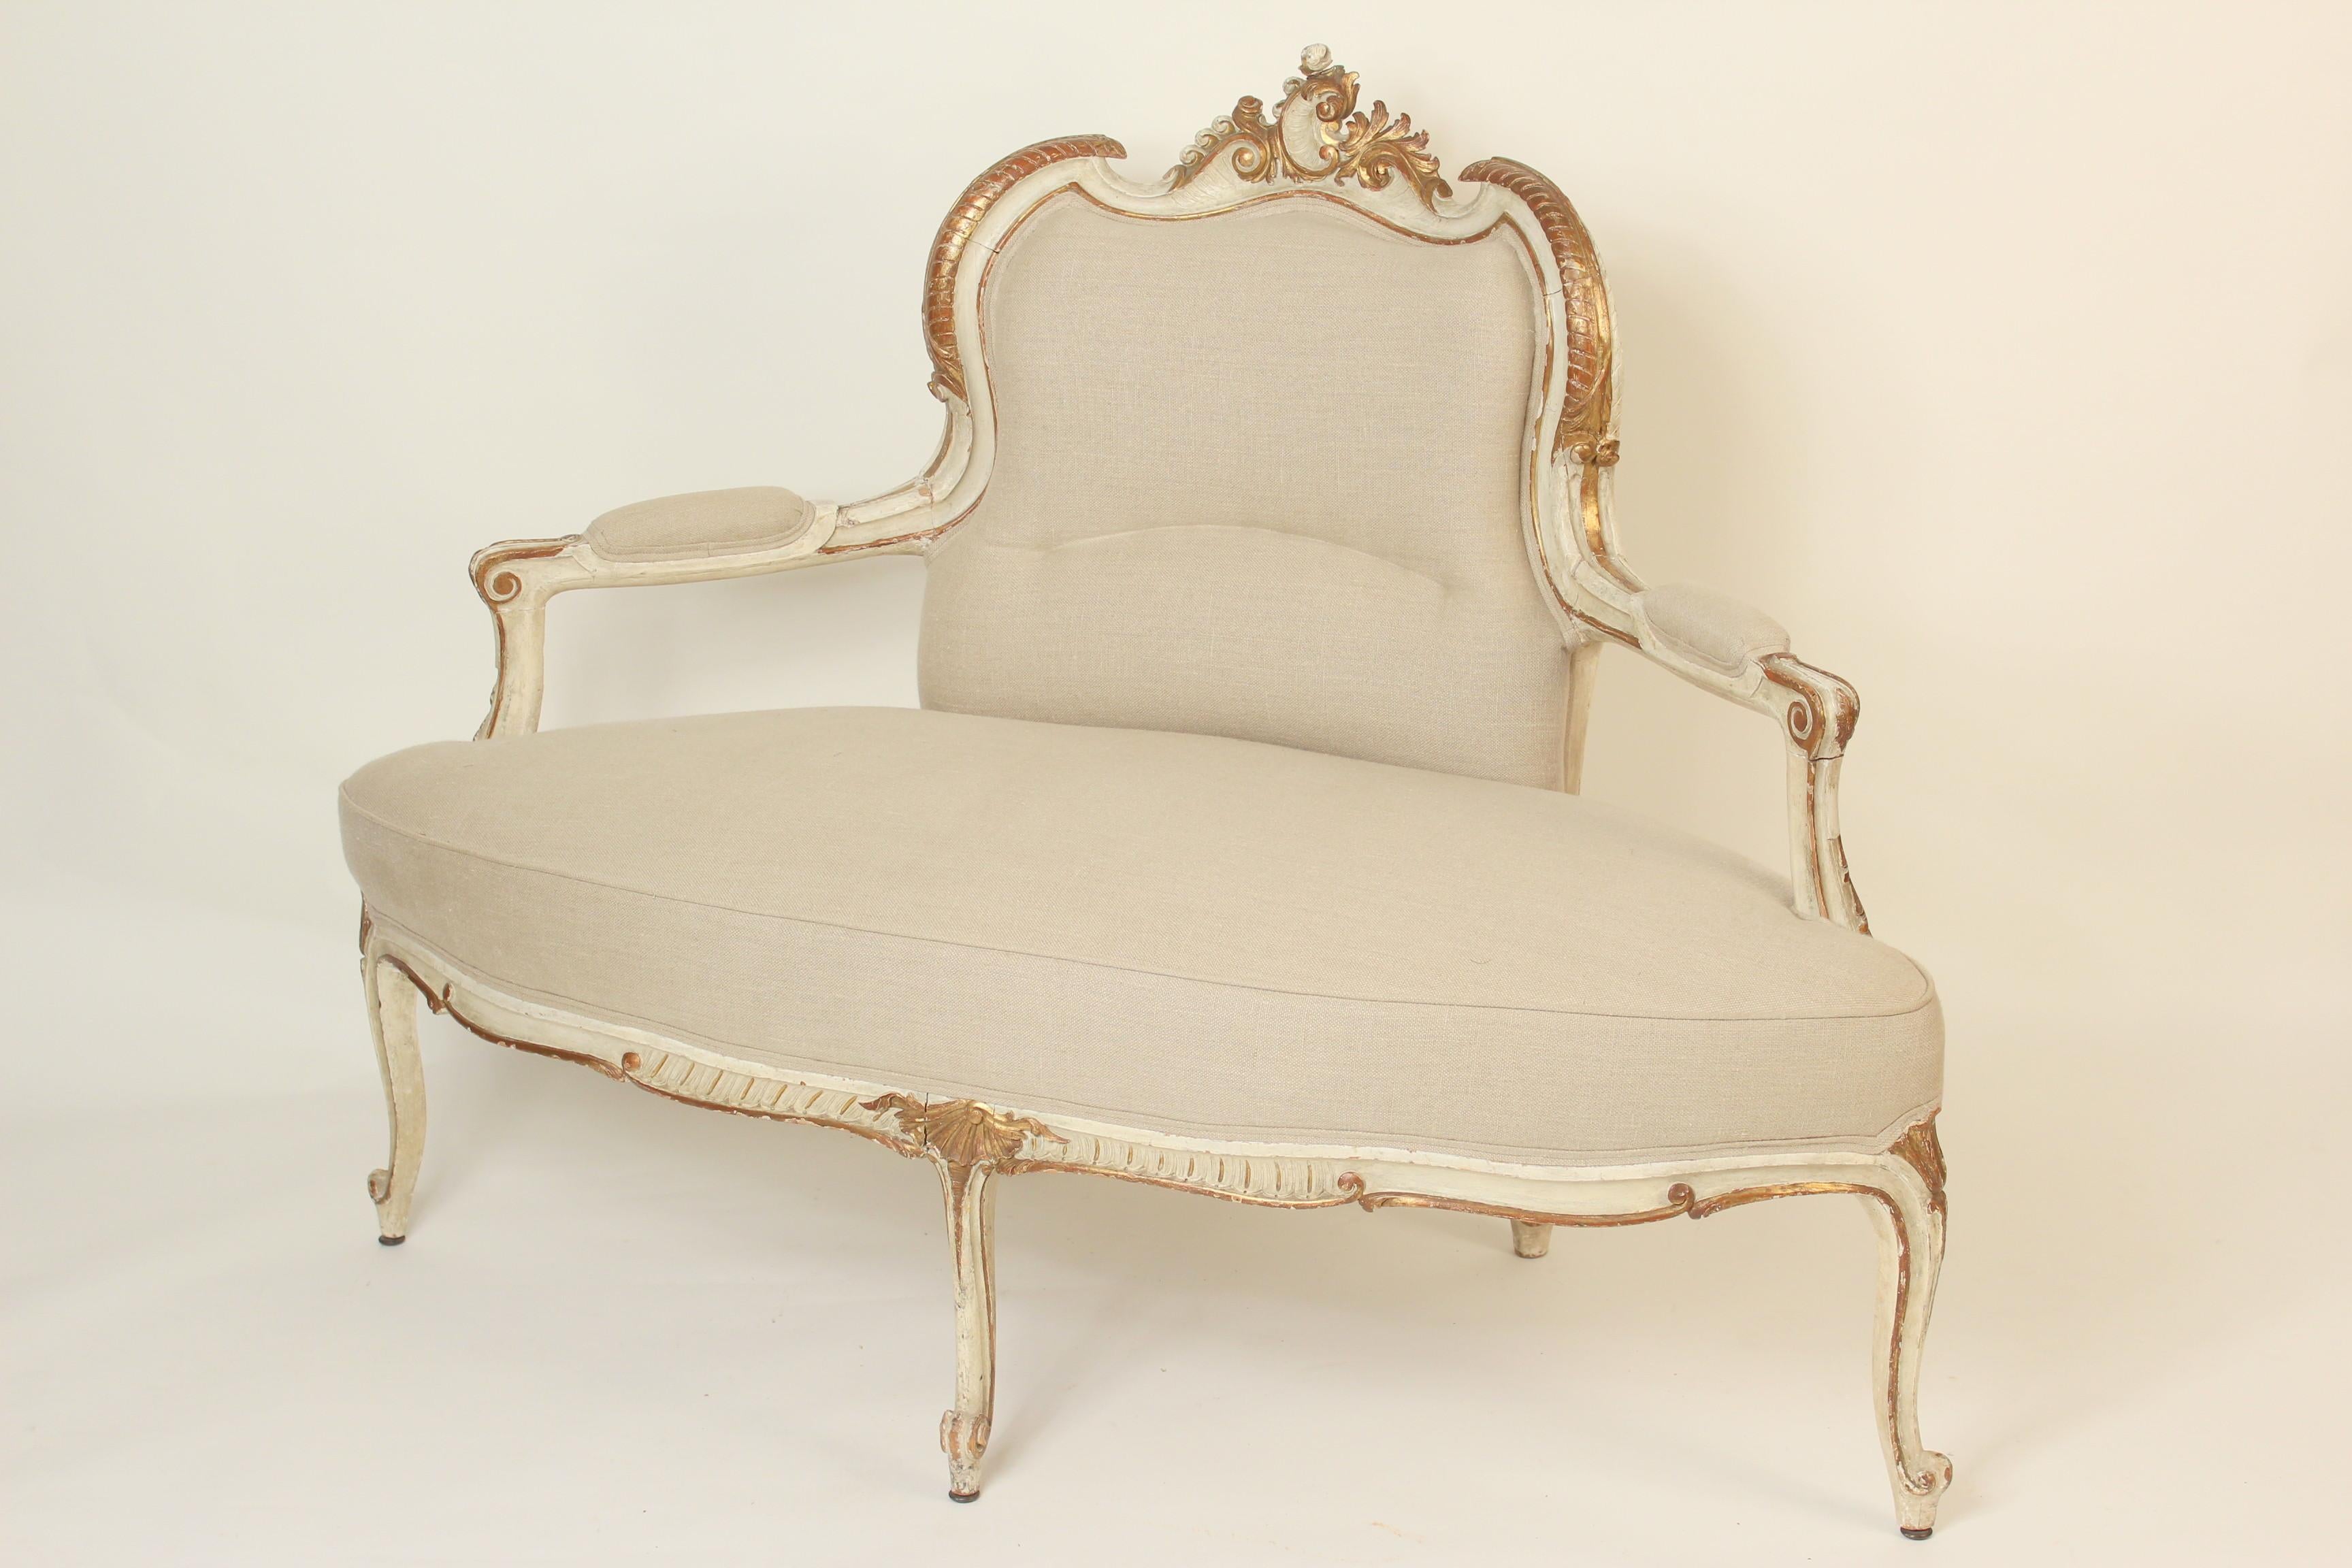 European Continental Louis XV Style Painted and Gilt Decorated Settee